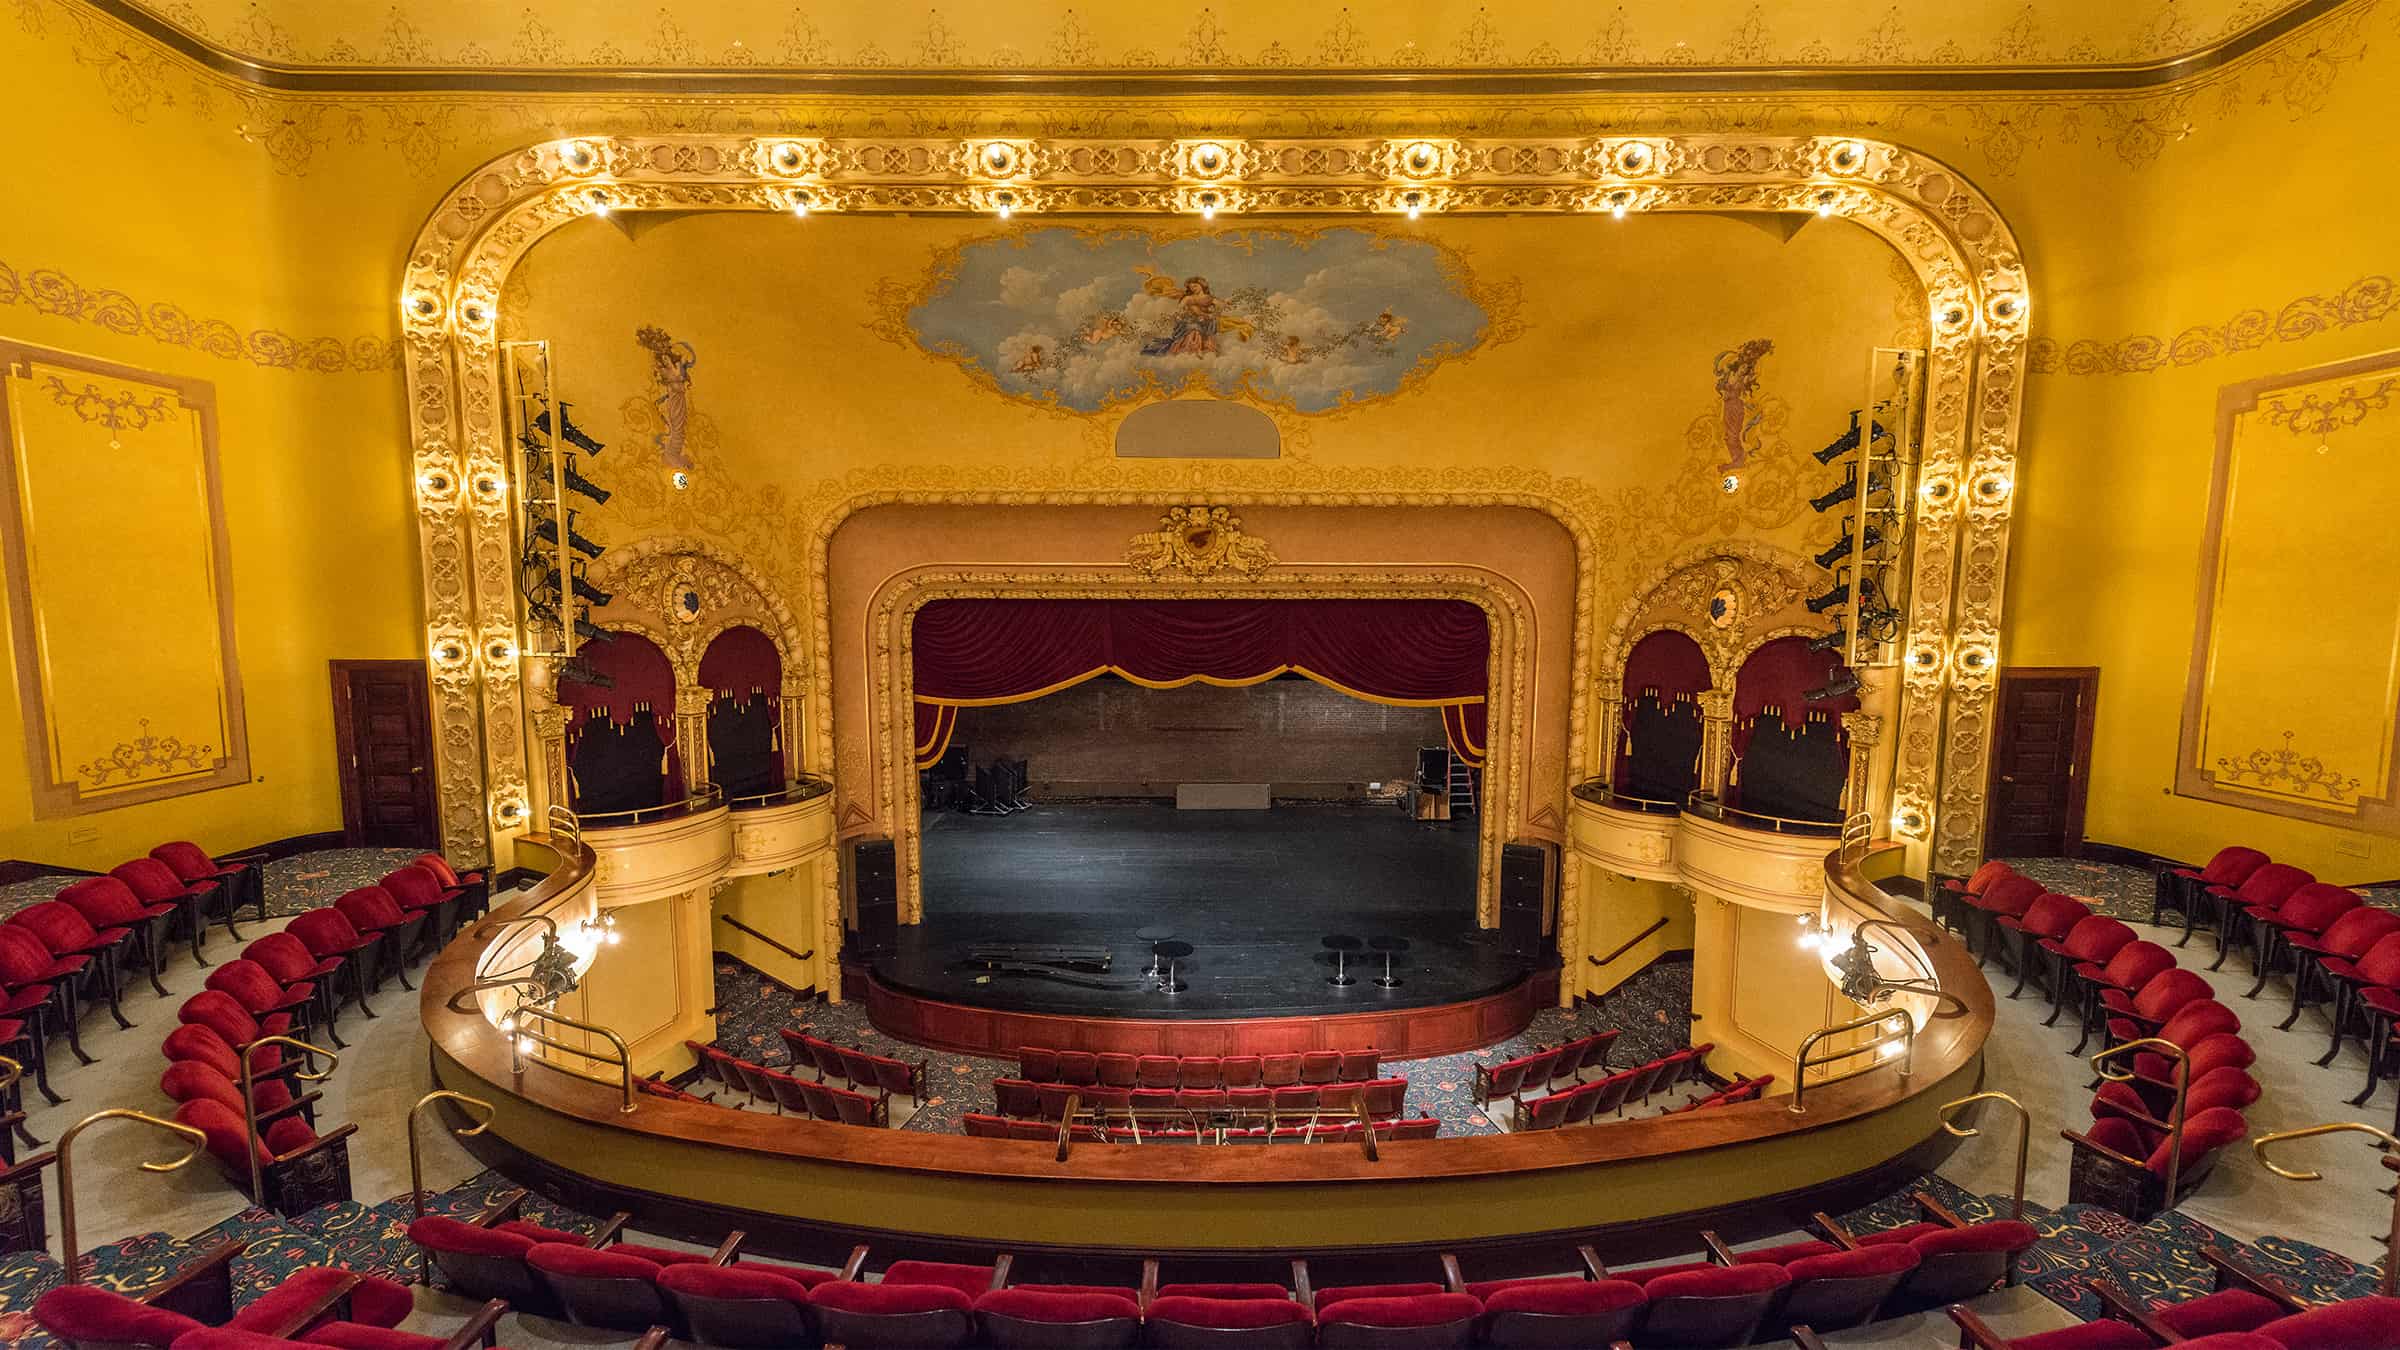 Historic Sheldon Theater - 1920s Architecture with Historic Theater Seating and Balcony Theater Seating